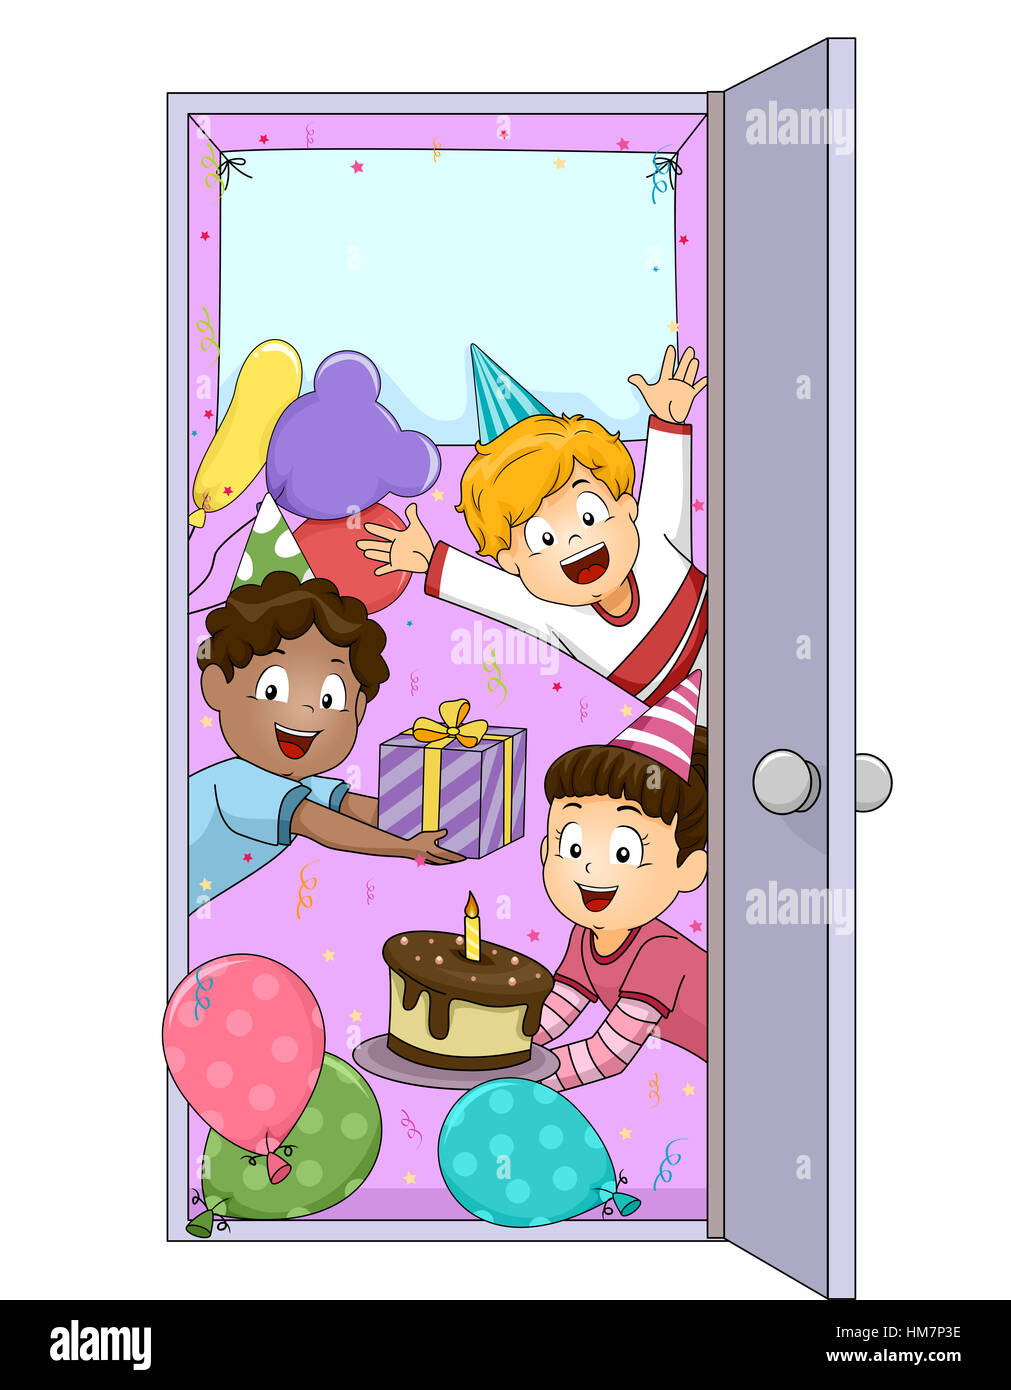 Illustration of Children Welcoming Party Guests Stock Photo